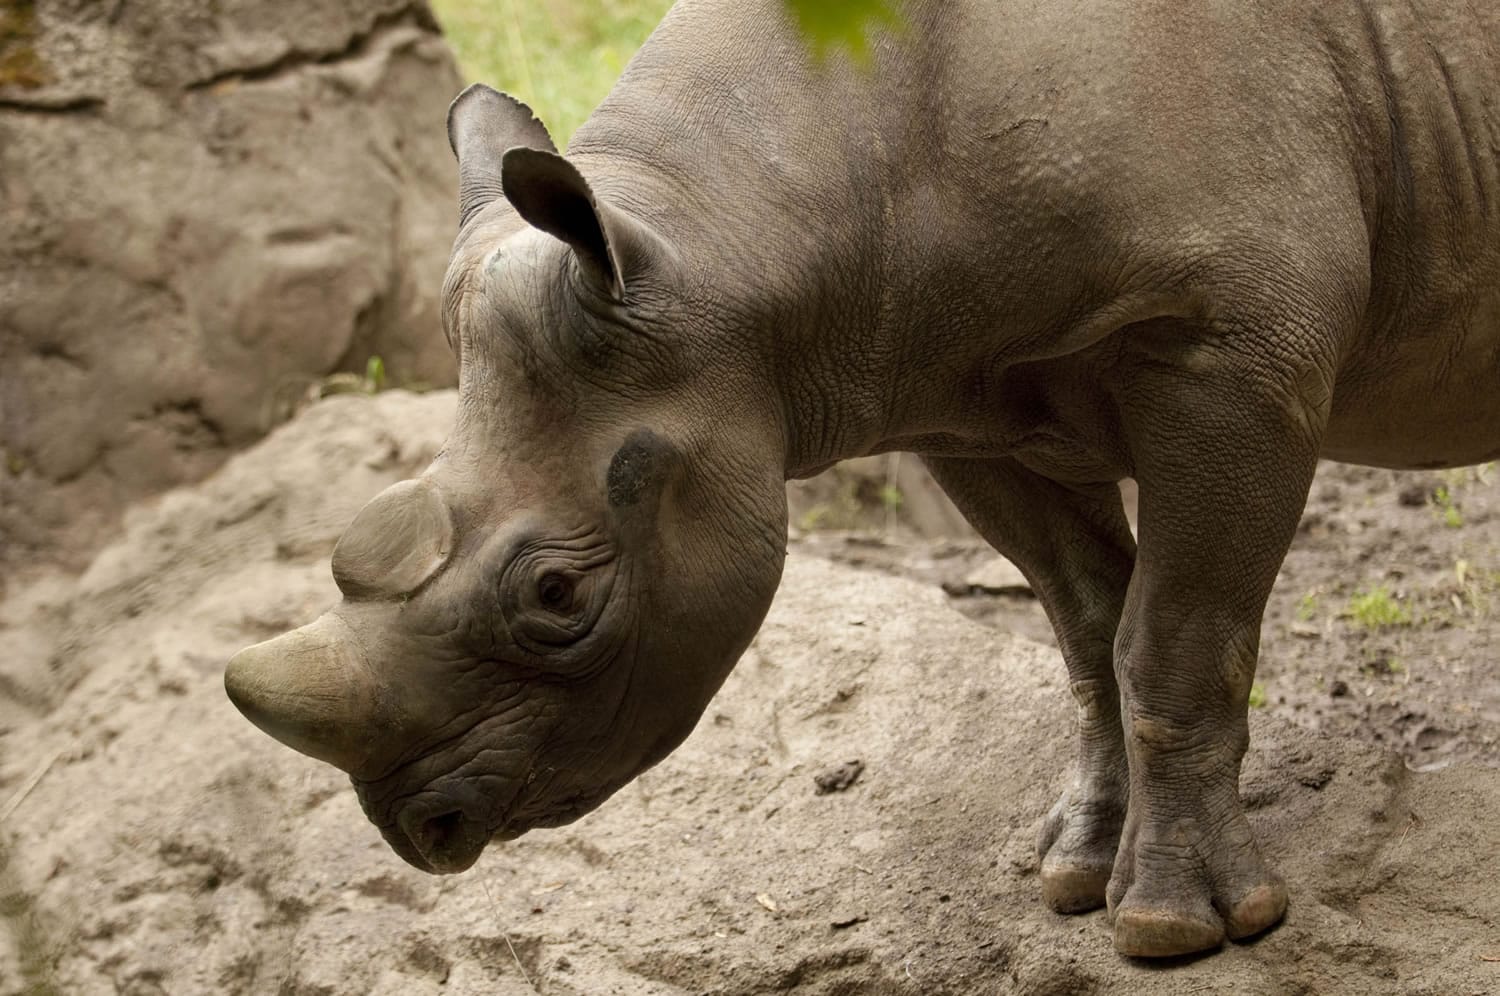 Pete, the Oregon Zoo's black rhino, has been euthanized at the age of 24.